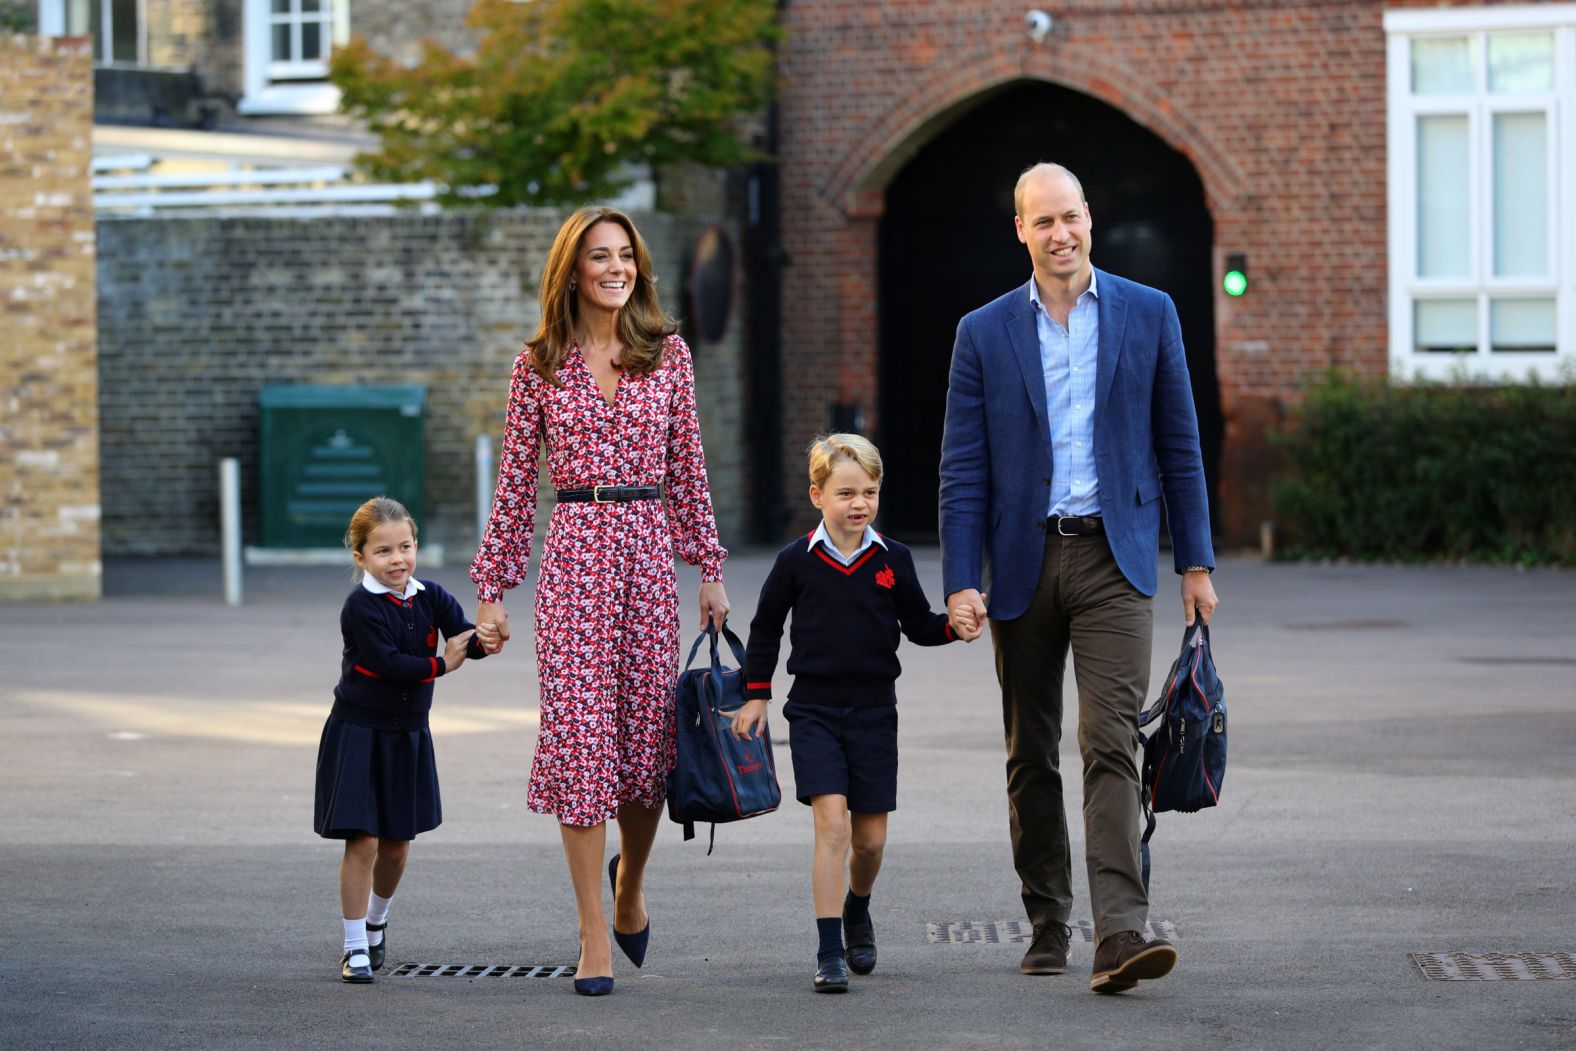 William and Catherine escort Princess Charlotte -- accompanied by her brother, Prince George -- as Charlotte arrives for <a href="index.php?page=&url=https%3A%2F%2Fedition.cnn.com%2F2019%2F09%2F05%2Fuk%2Fprincess-charlotte-school-gbr-intl%2Findex.html" target="_blank">her first day of school</a> in September 2019.